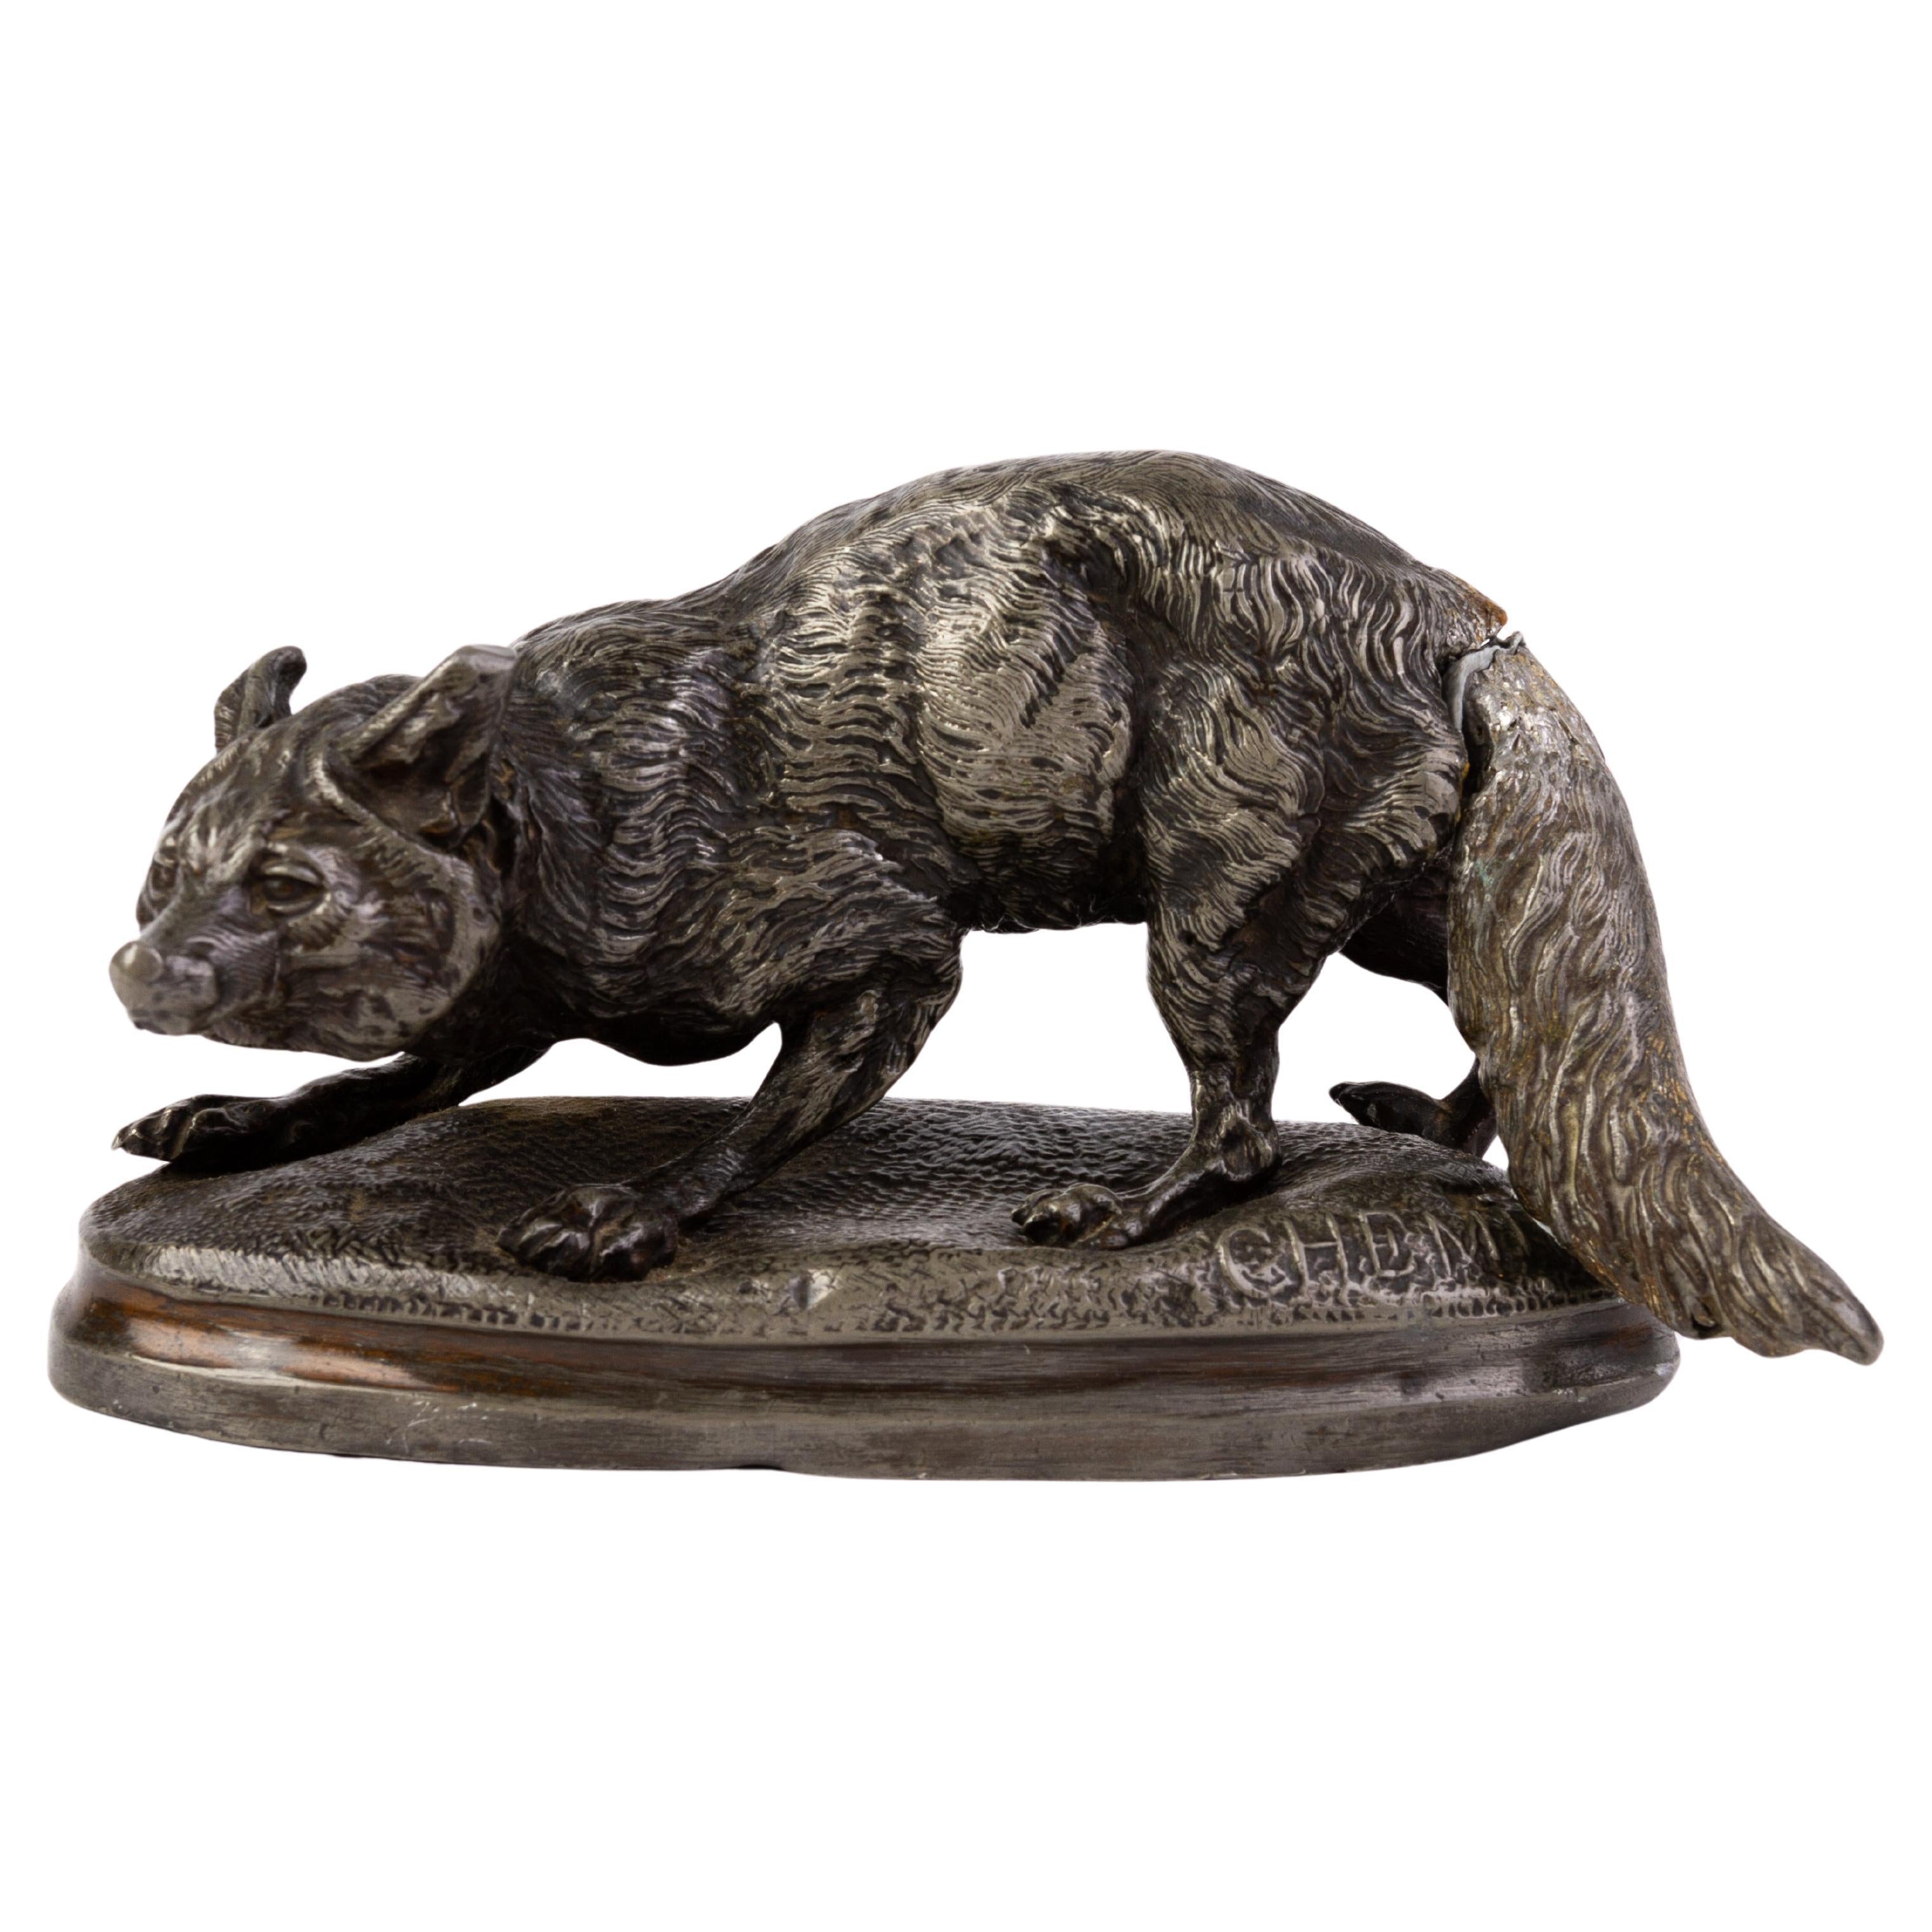 Joseph Victor Chemin (1825-1901) Signed French Spelter Fox Sculpture 19th C 